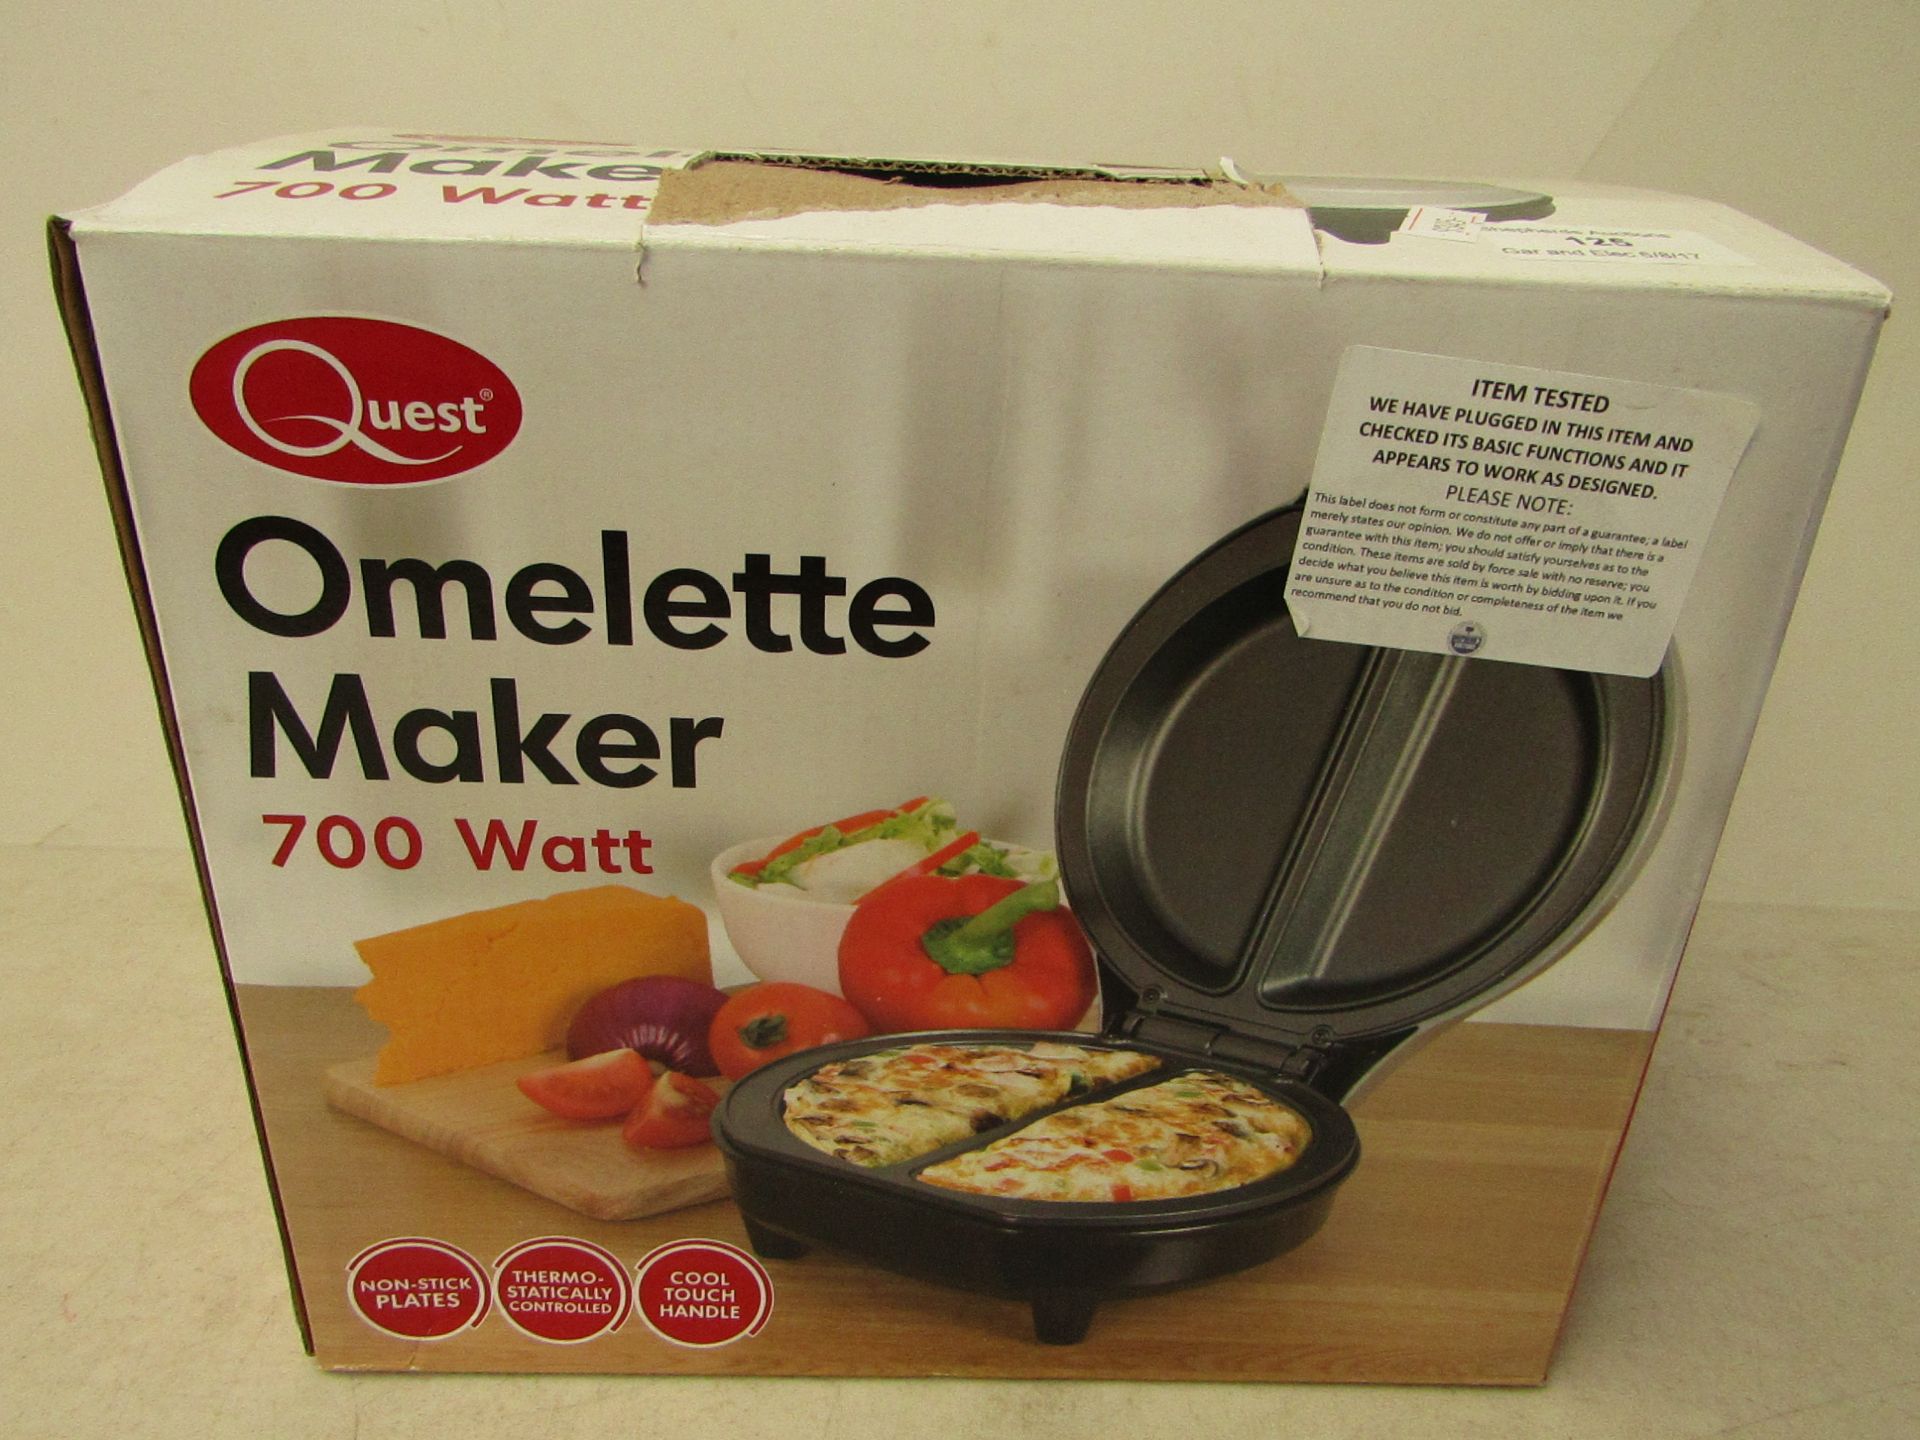 Quest 700w omlette maker, tested working and boxed